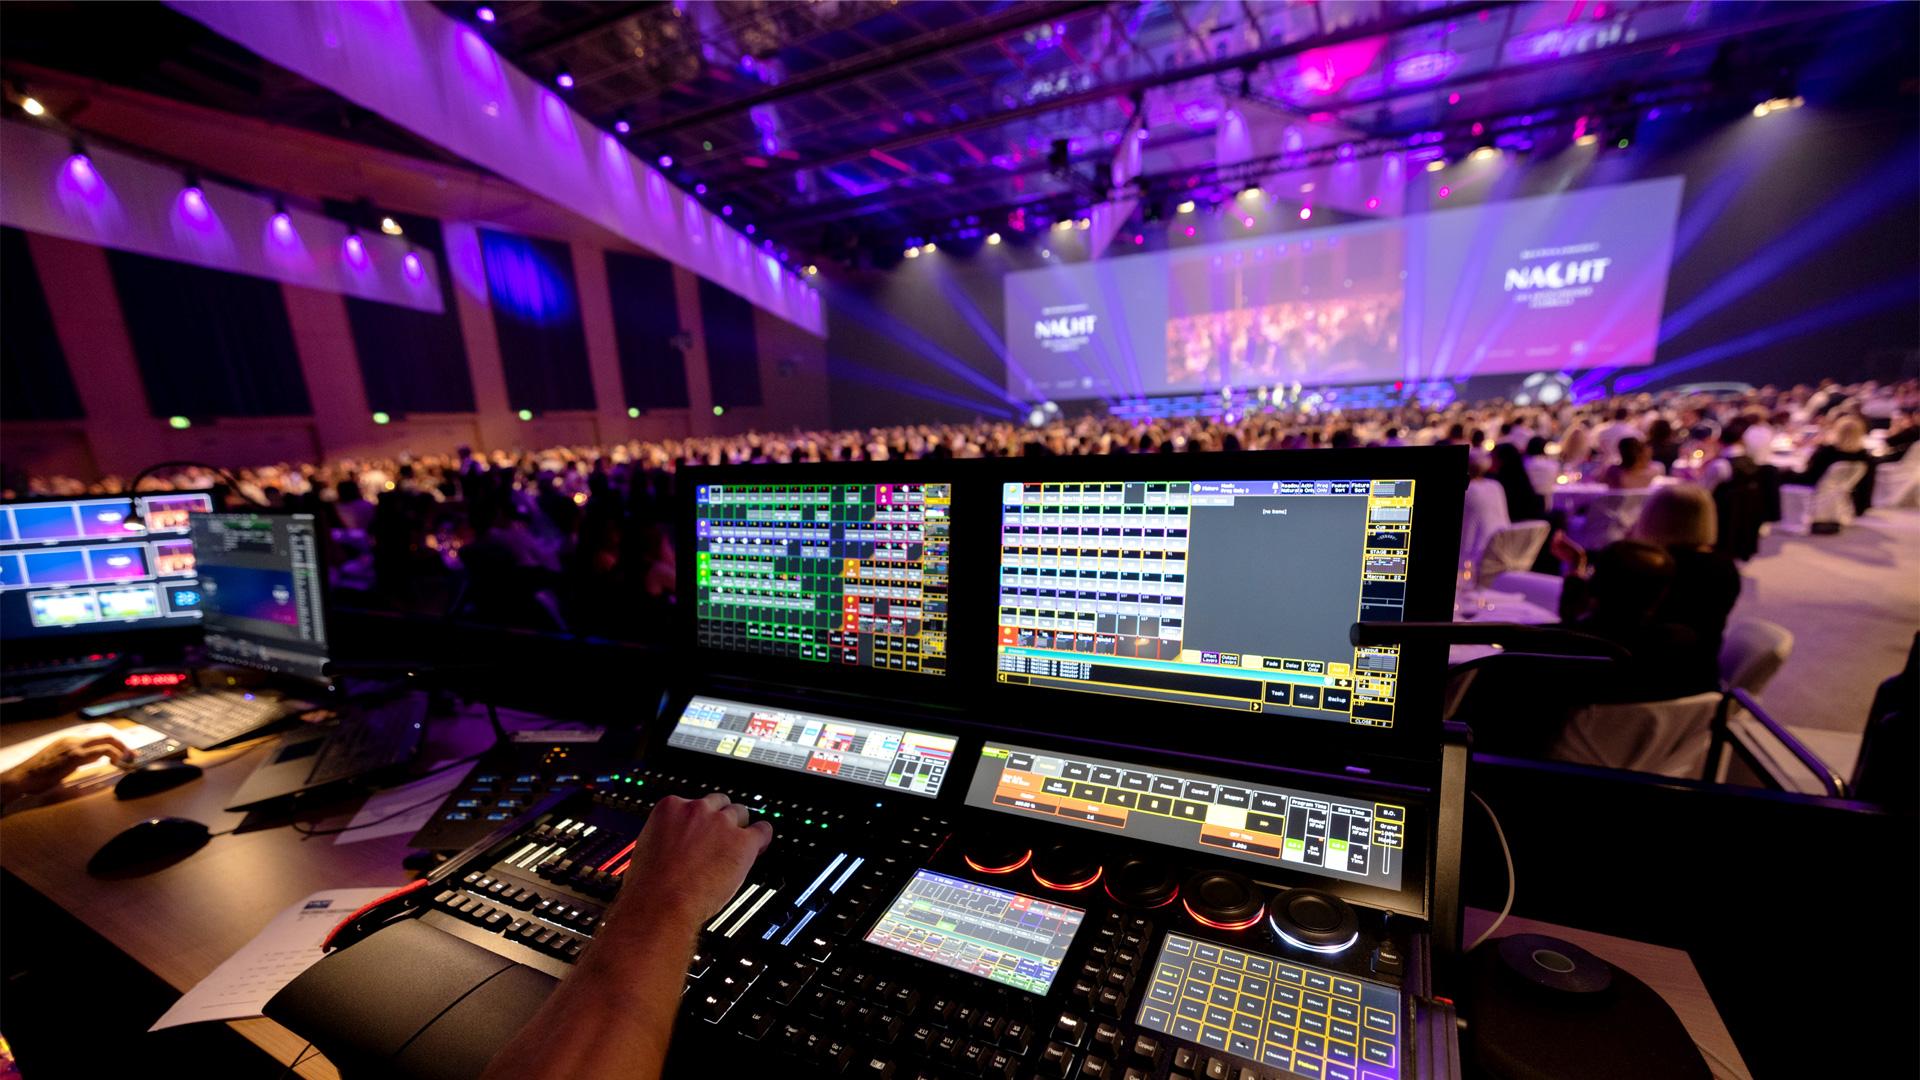 Stagelight AG invests in the PROLIGHTS EclExpo Flood300VW